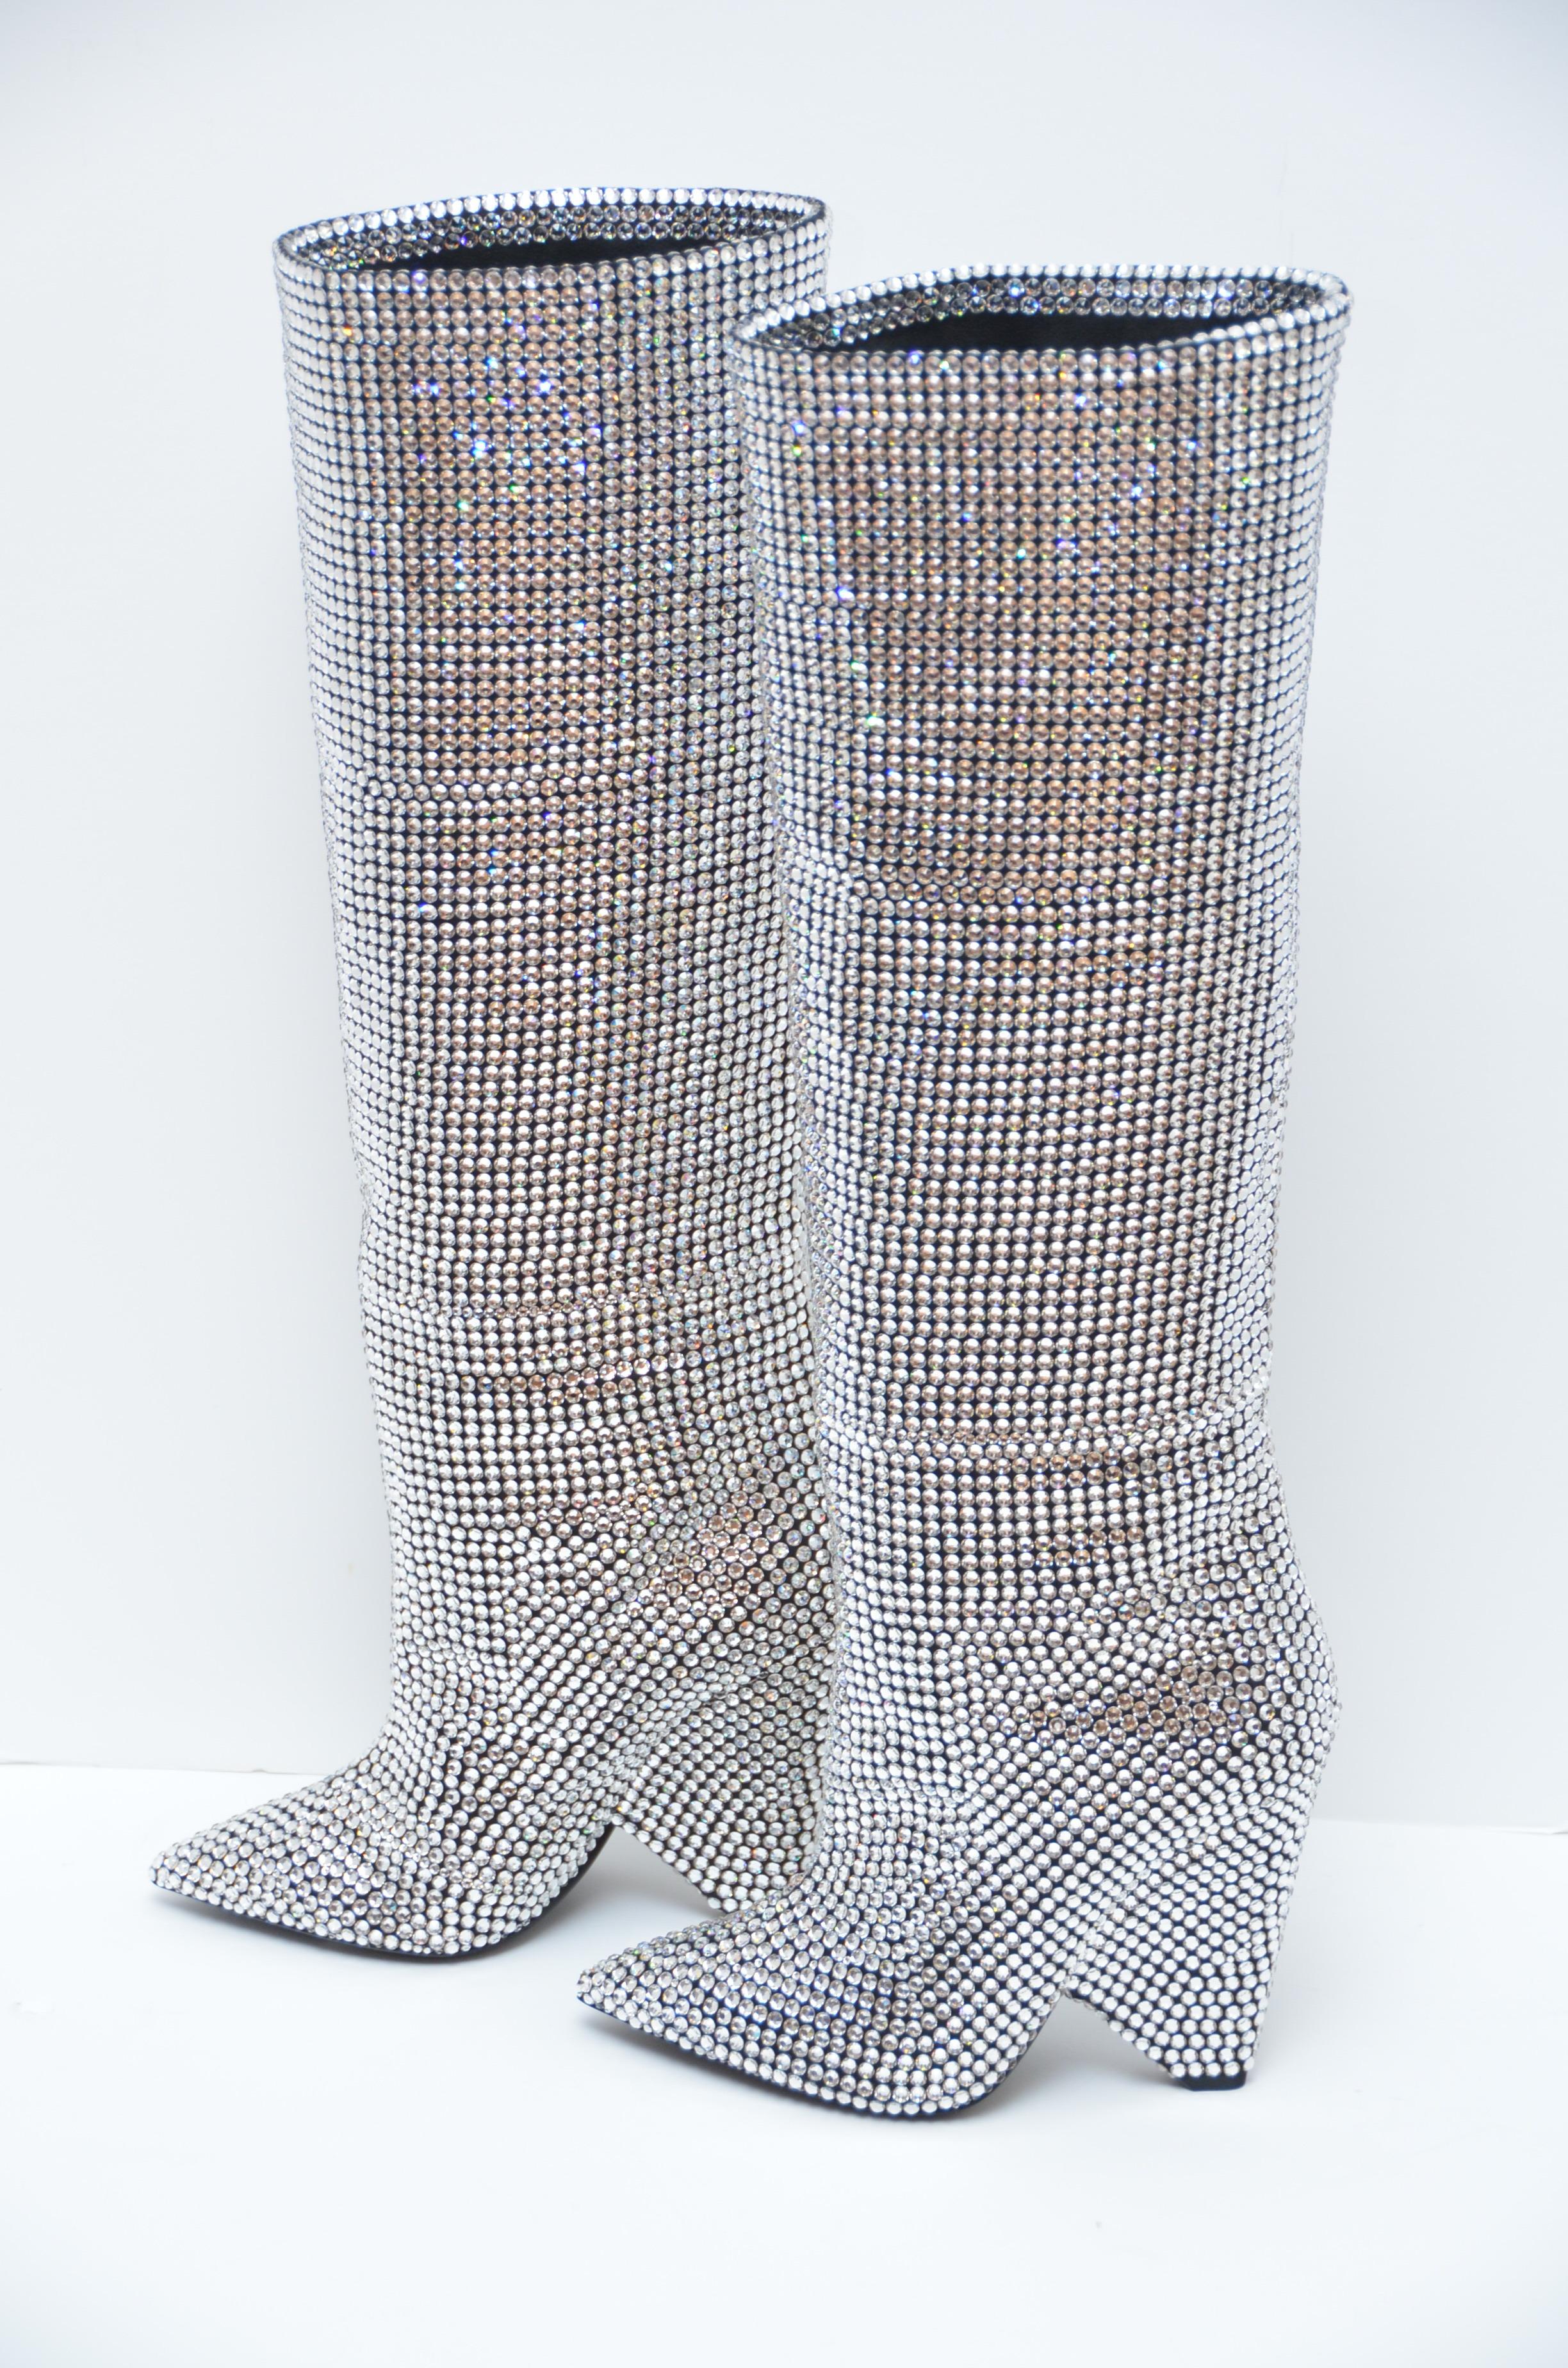 Saint Laurent Niki Crystals Embellished  Boots Retailed $10, 000  NEW W Box  39 1